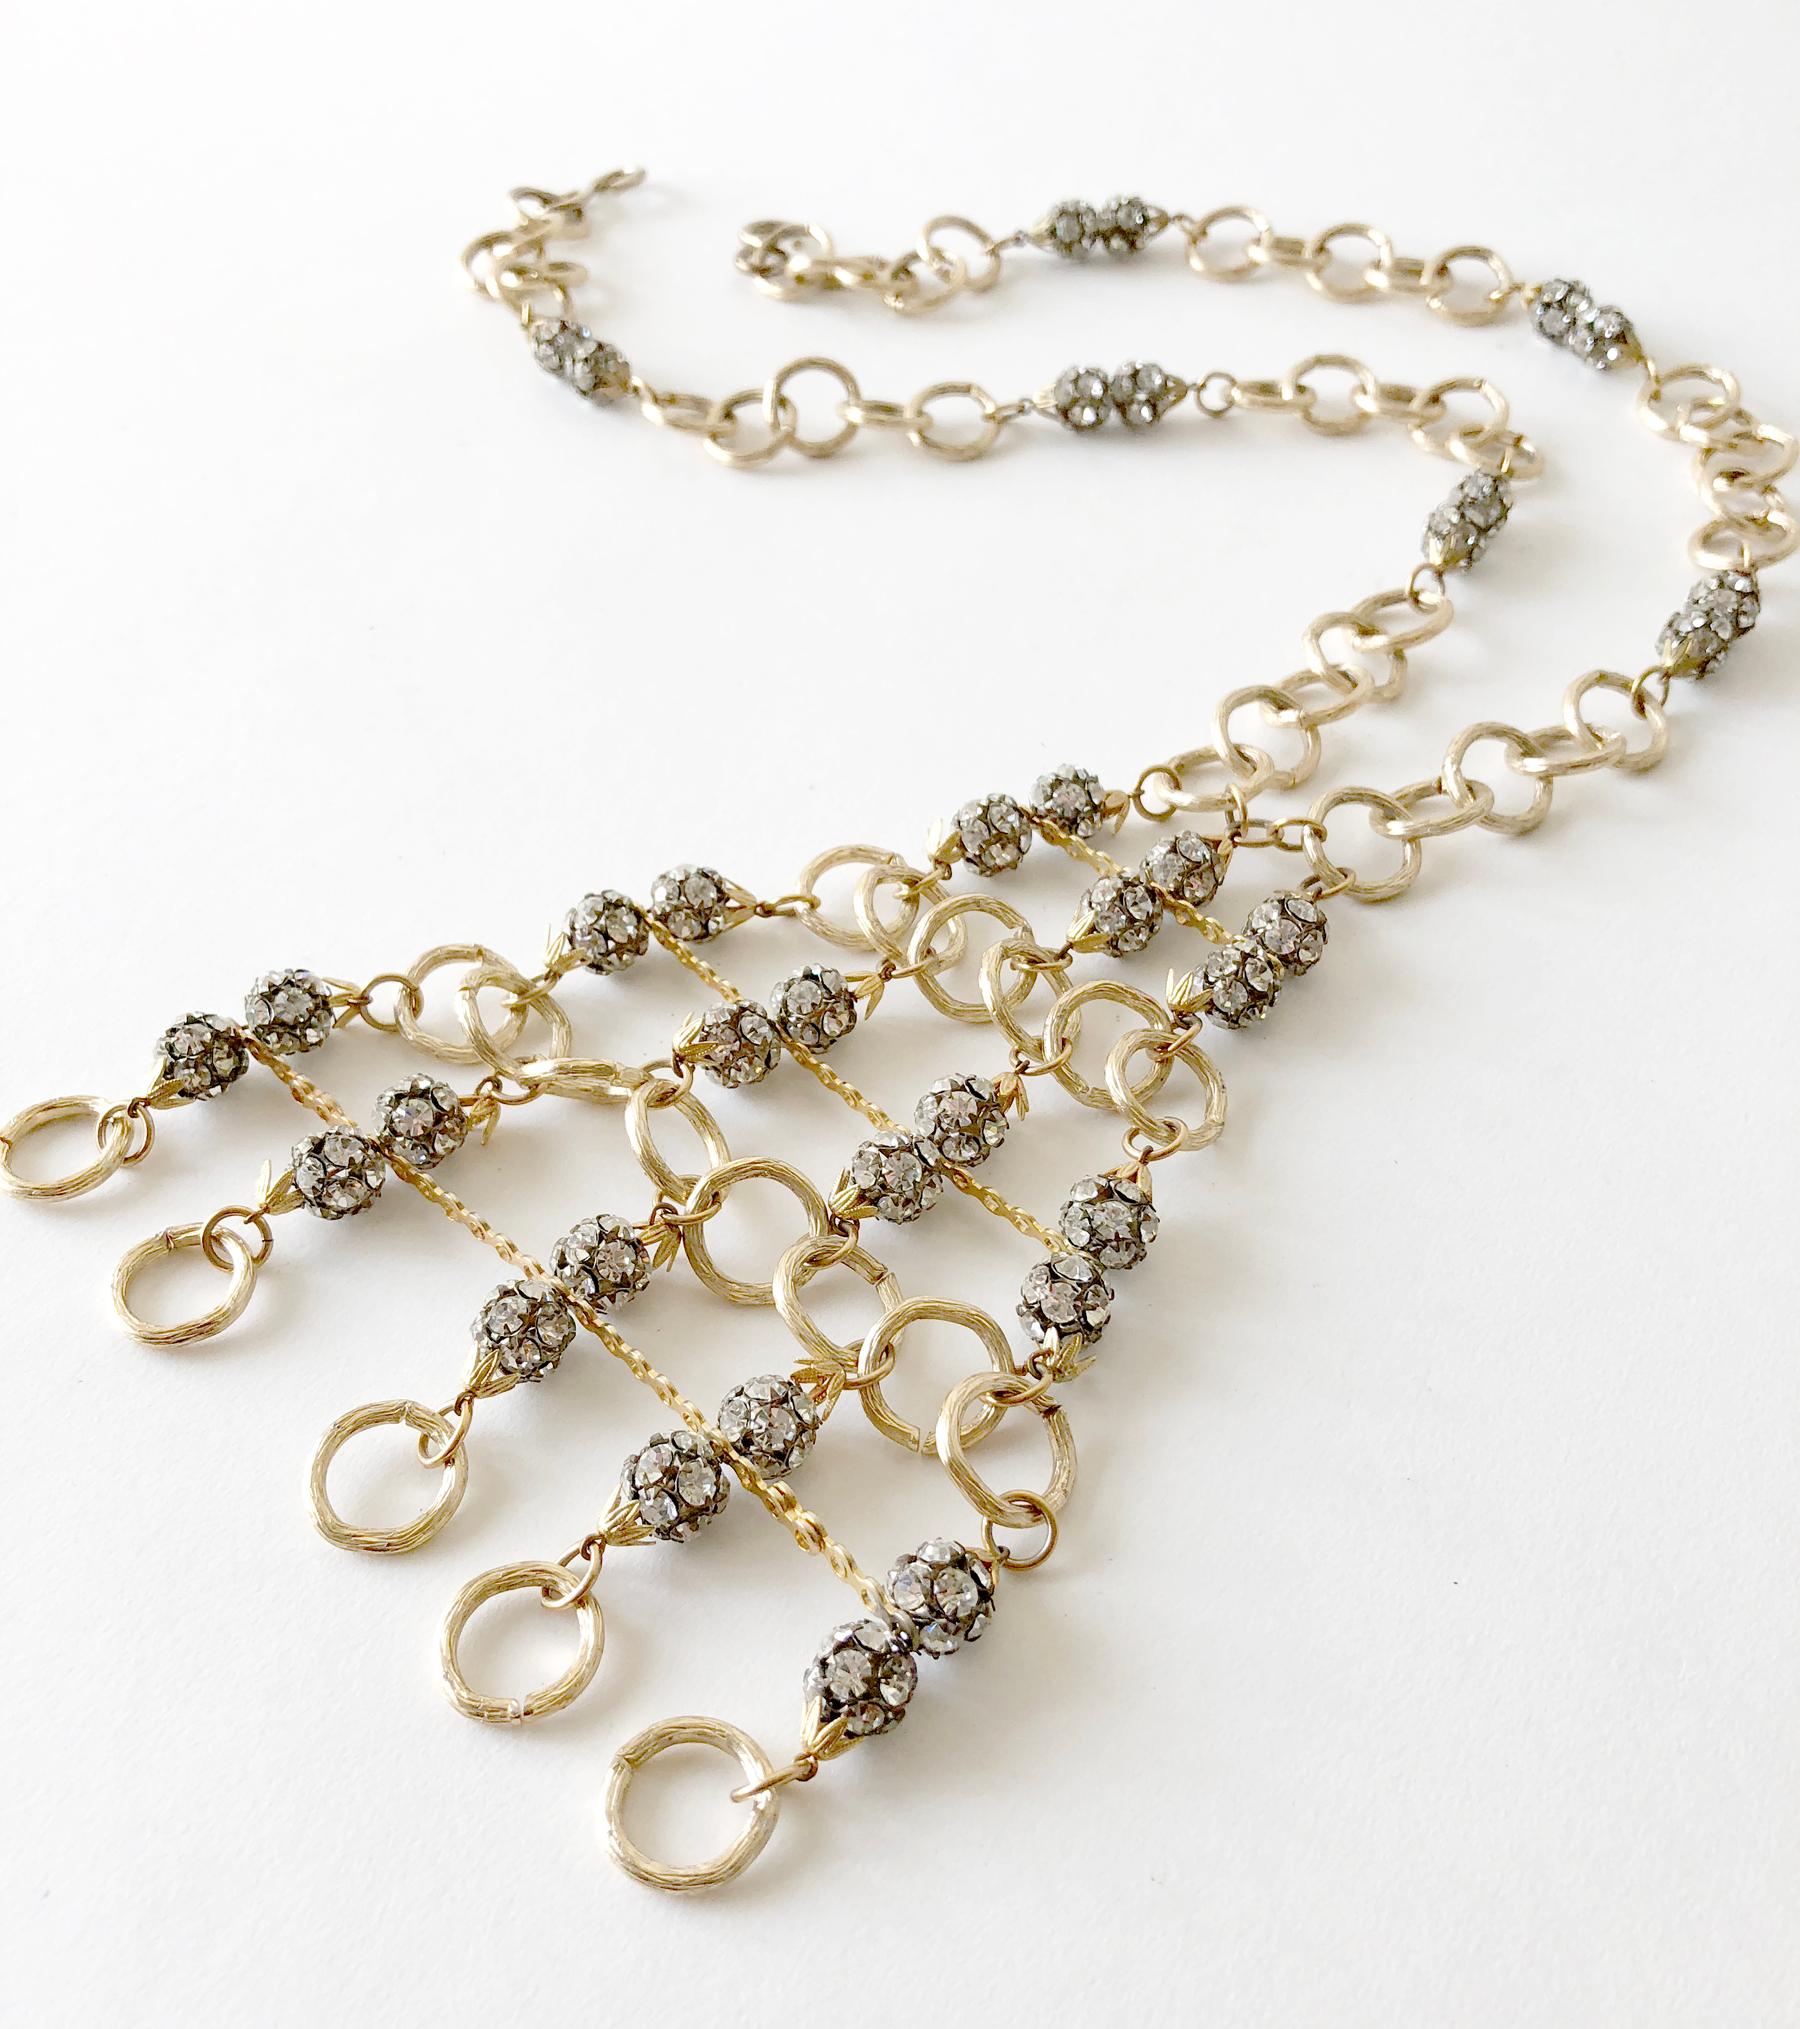 Gold toned aluminum and rhinestone glam statement necklace, circa 1960's. Necklace measures 22